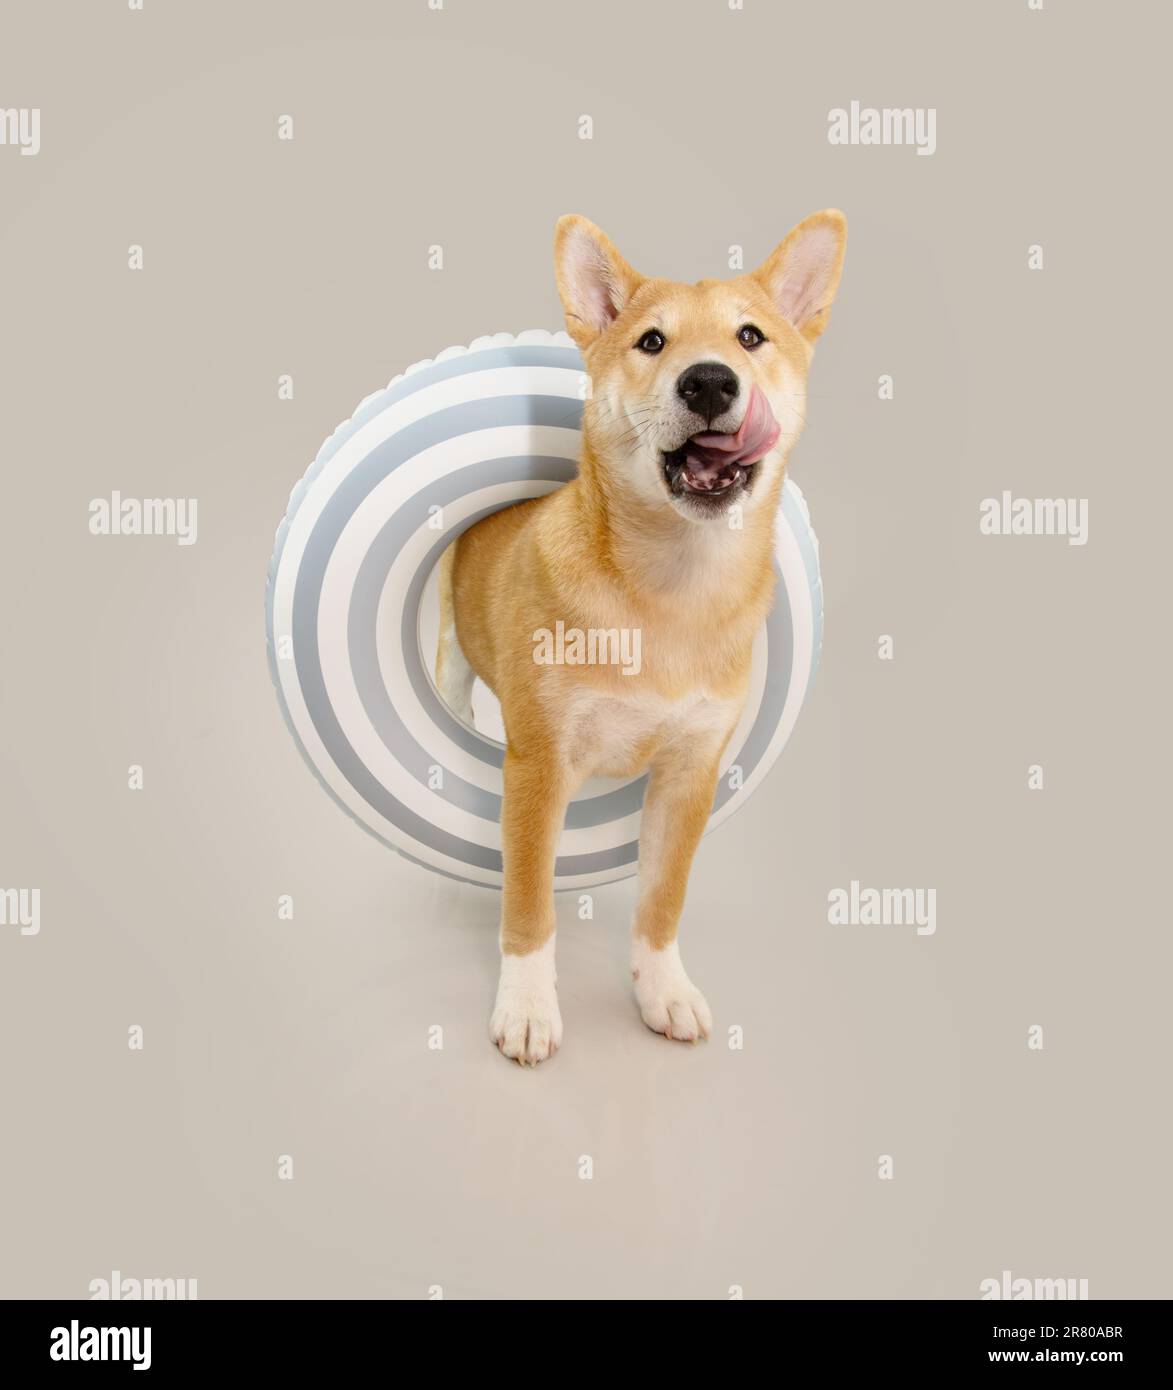 Portrait summer Shiba inu puppy dog summer inside of an inflatable ring and licking its lips with tongue. Isolated on gray background Stock Photo